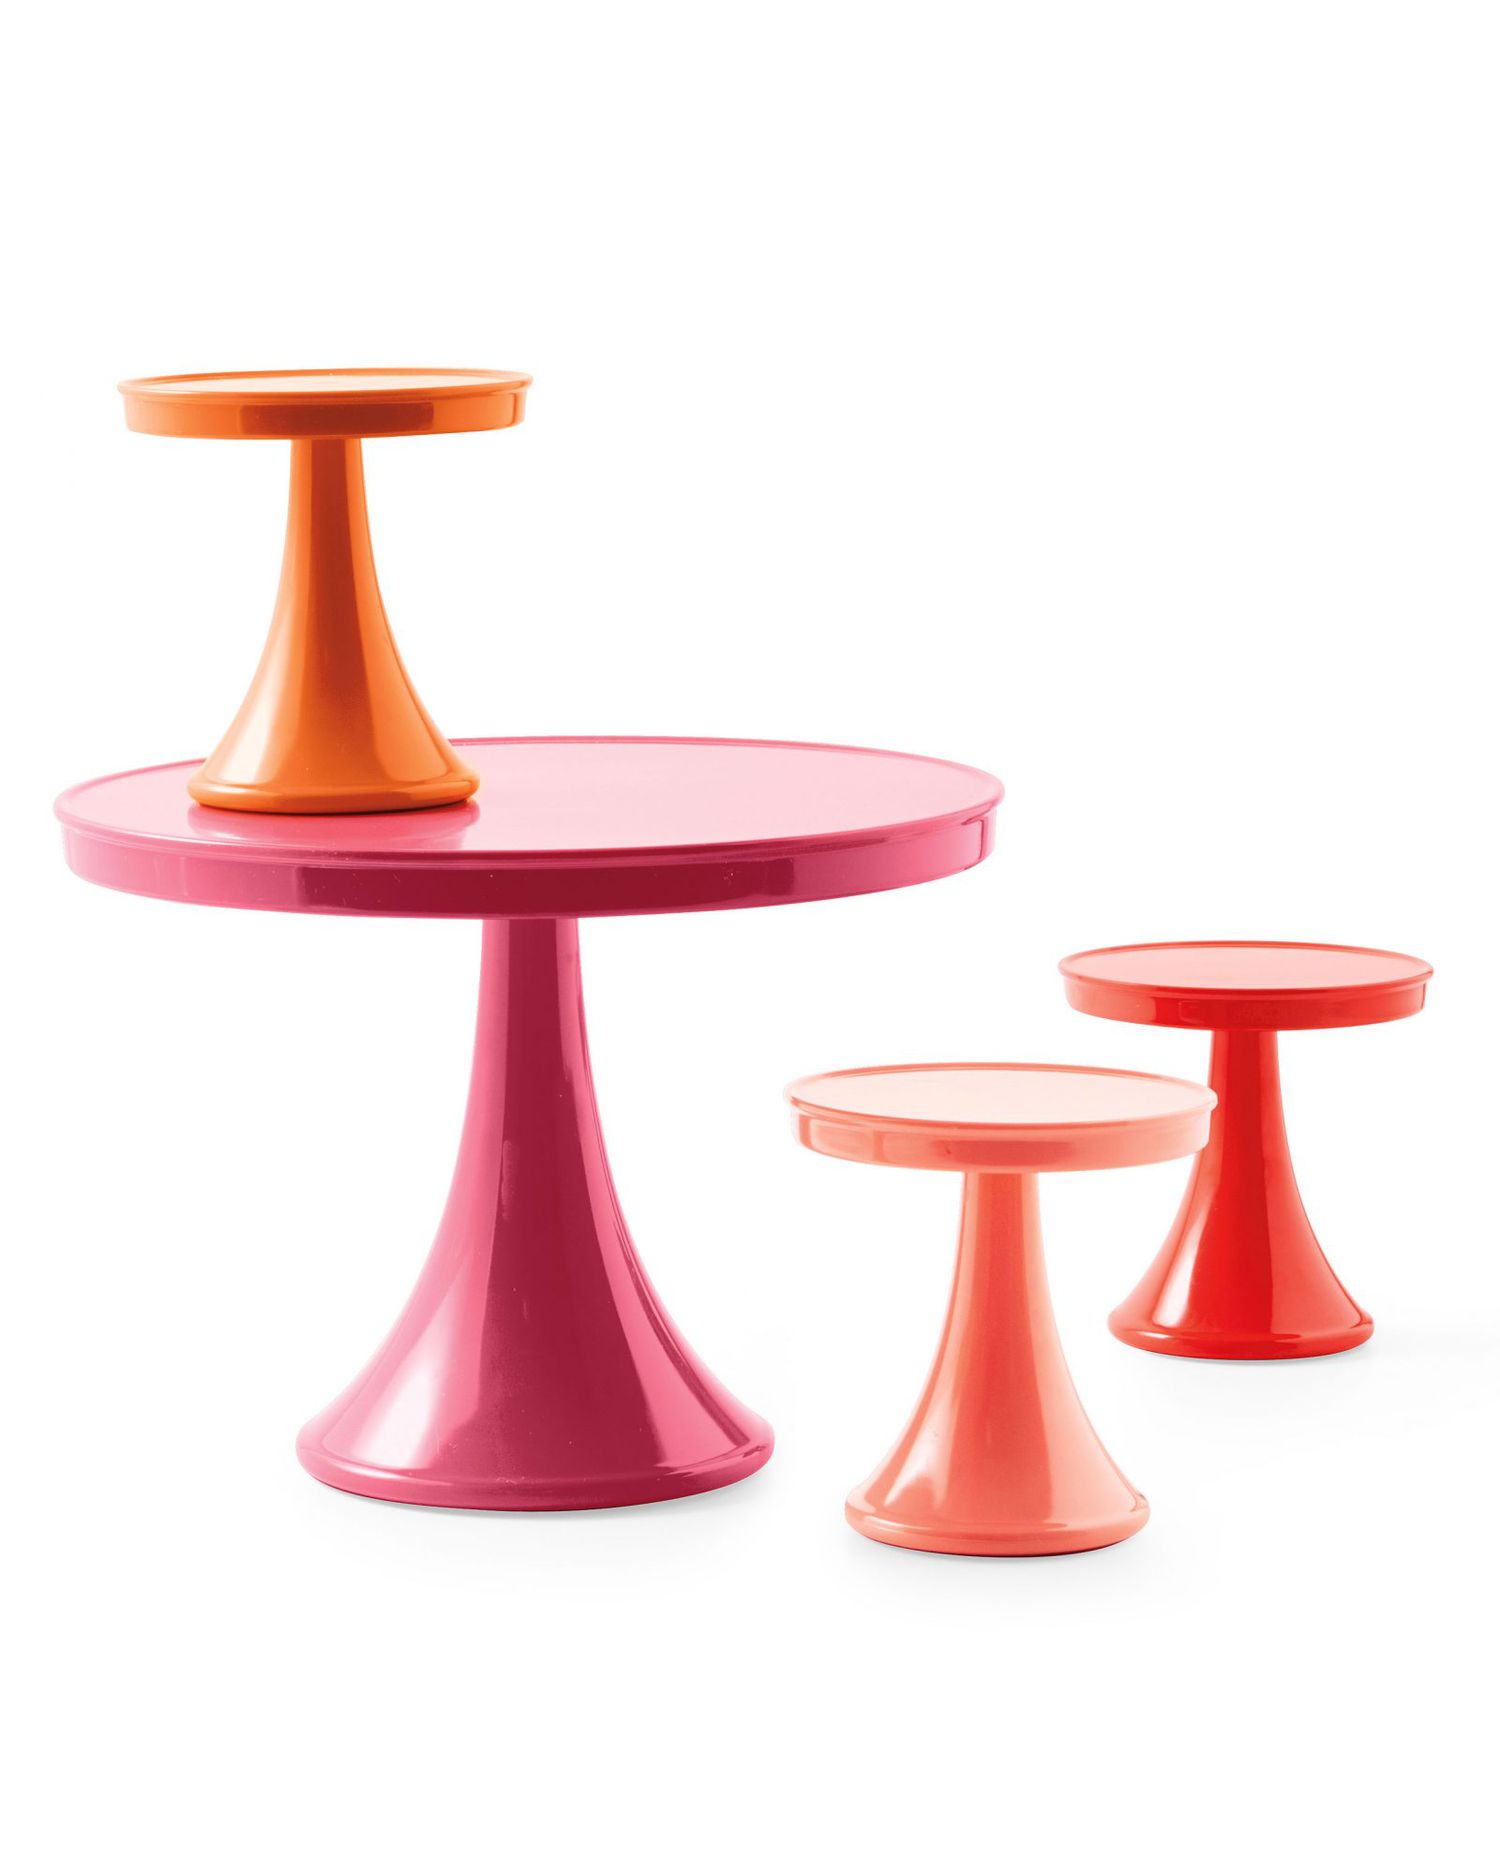 m-in-love-with-cake-cupcake-color-stands-0254-d112722.jpg